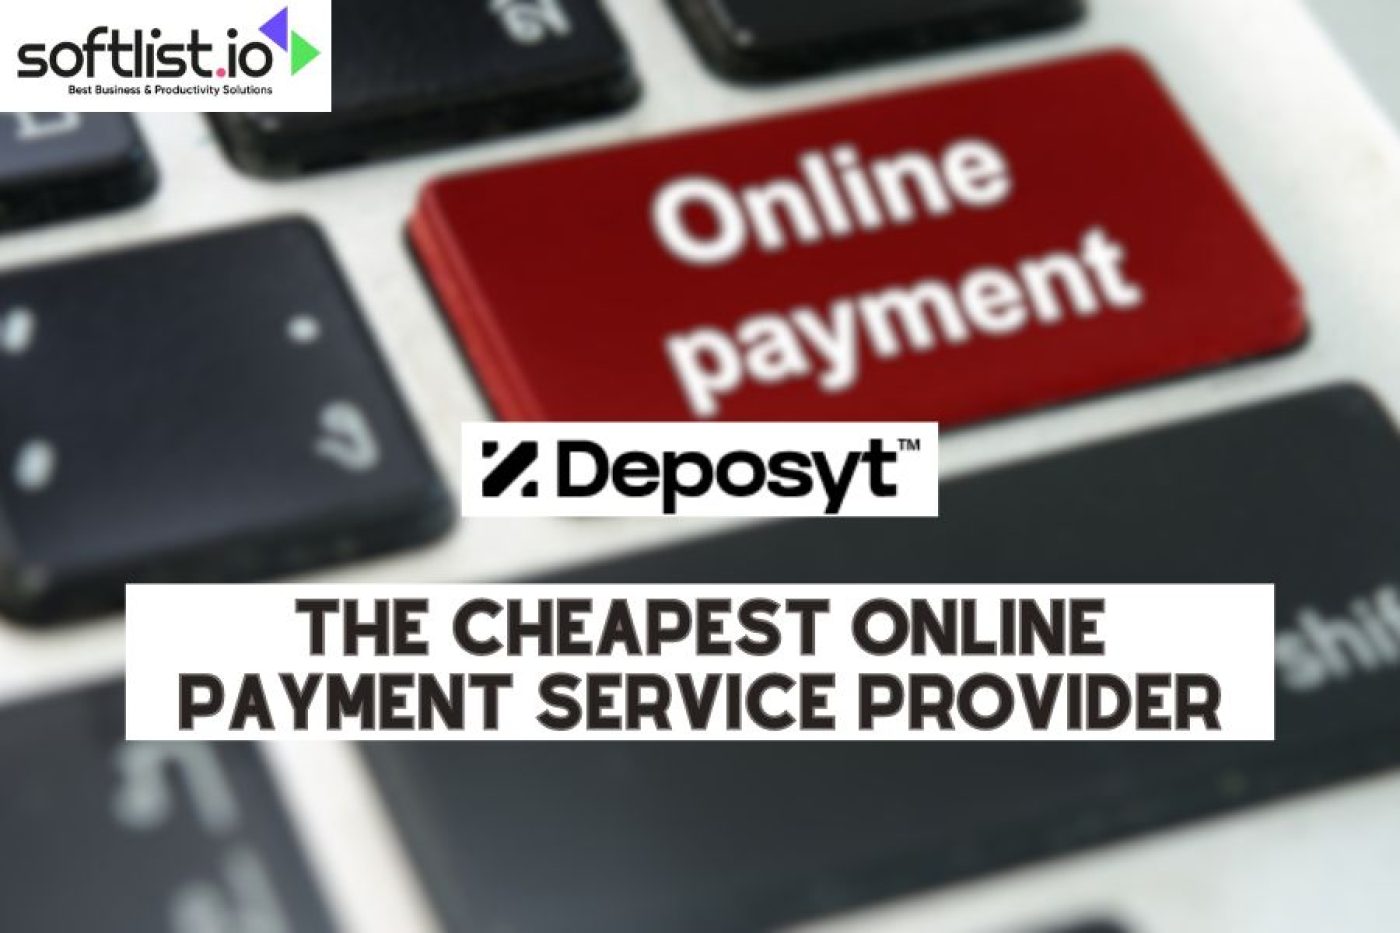 Deposyt: The Cheapest Online Payment Service Provider